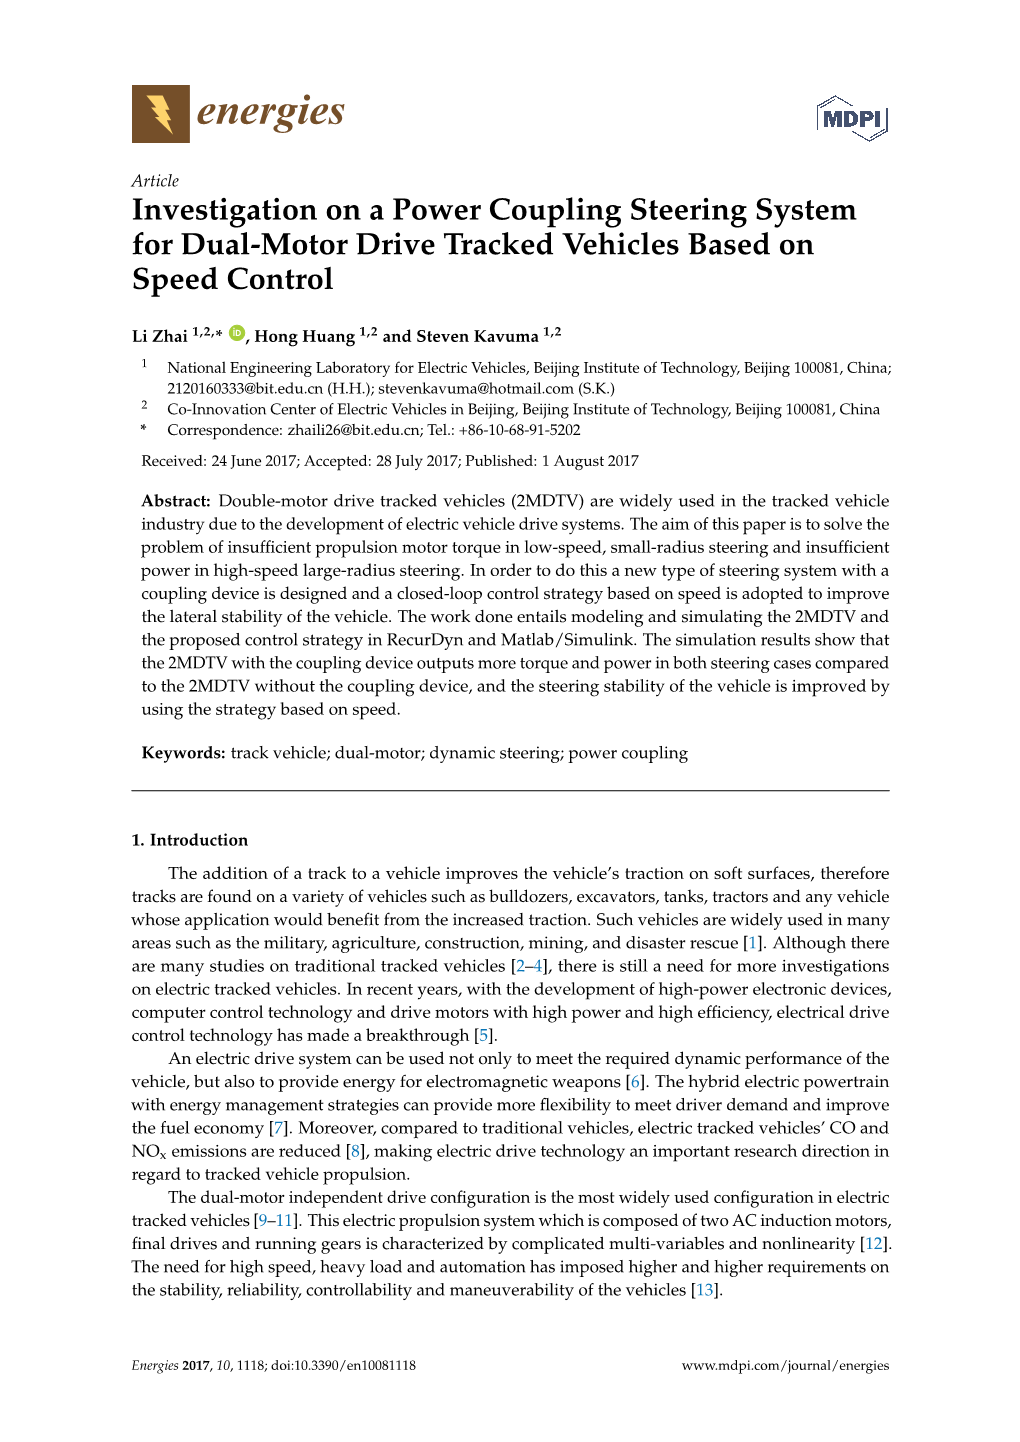 Investigation on a Power Coupling Steering System for Dual-Motor Drive Tracked Vehicles Based on Speed Control